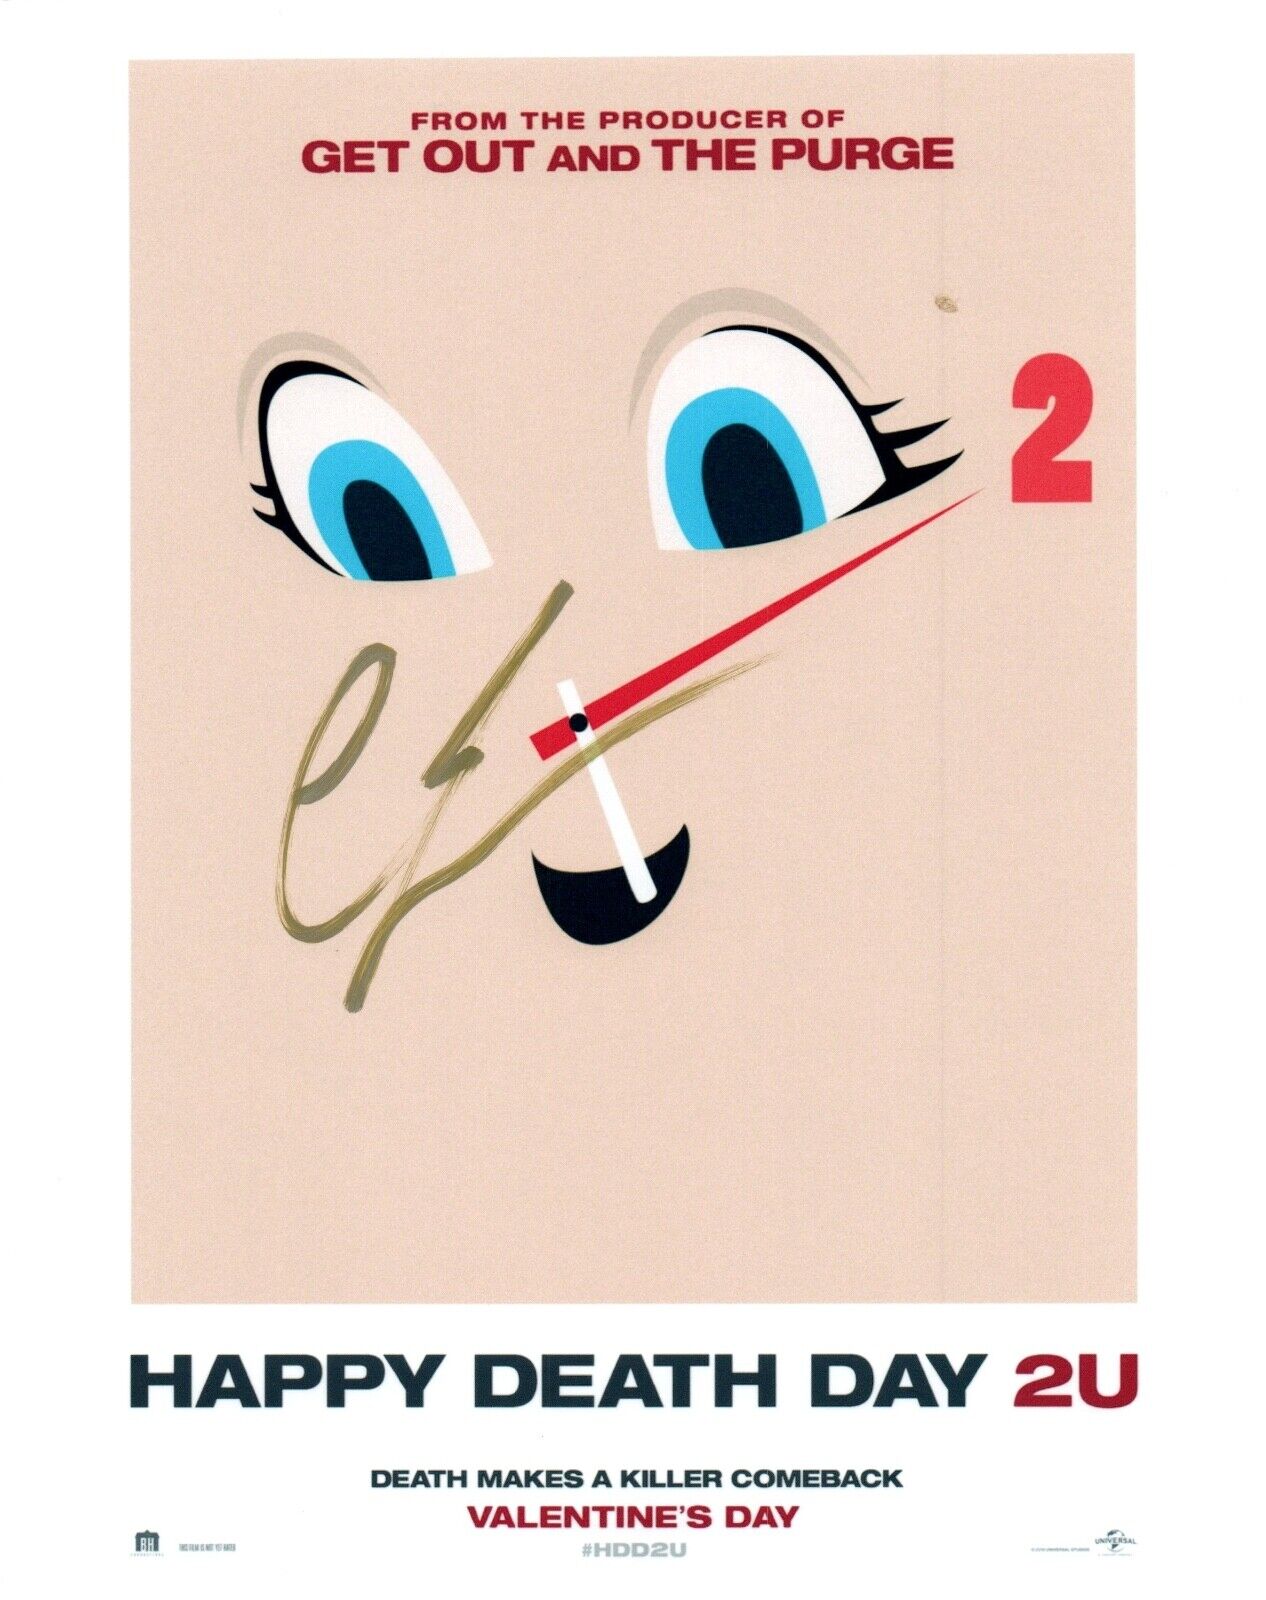 Christopher Landon Signed Autographed 8x10 Photo Poster painting HAPPY DEATH DAY 2U Director COA